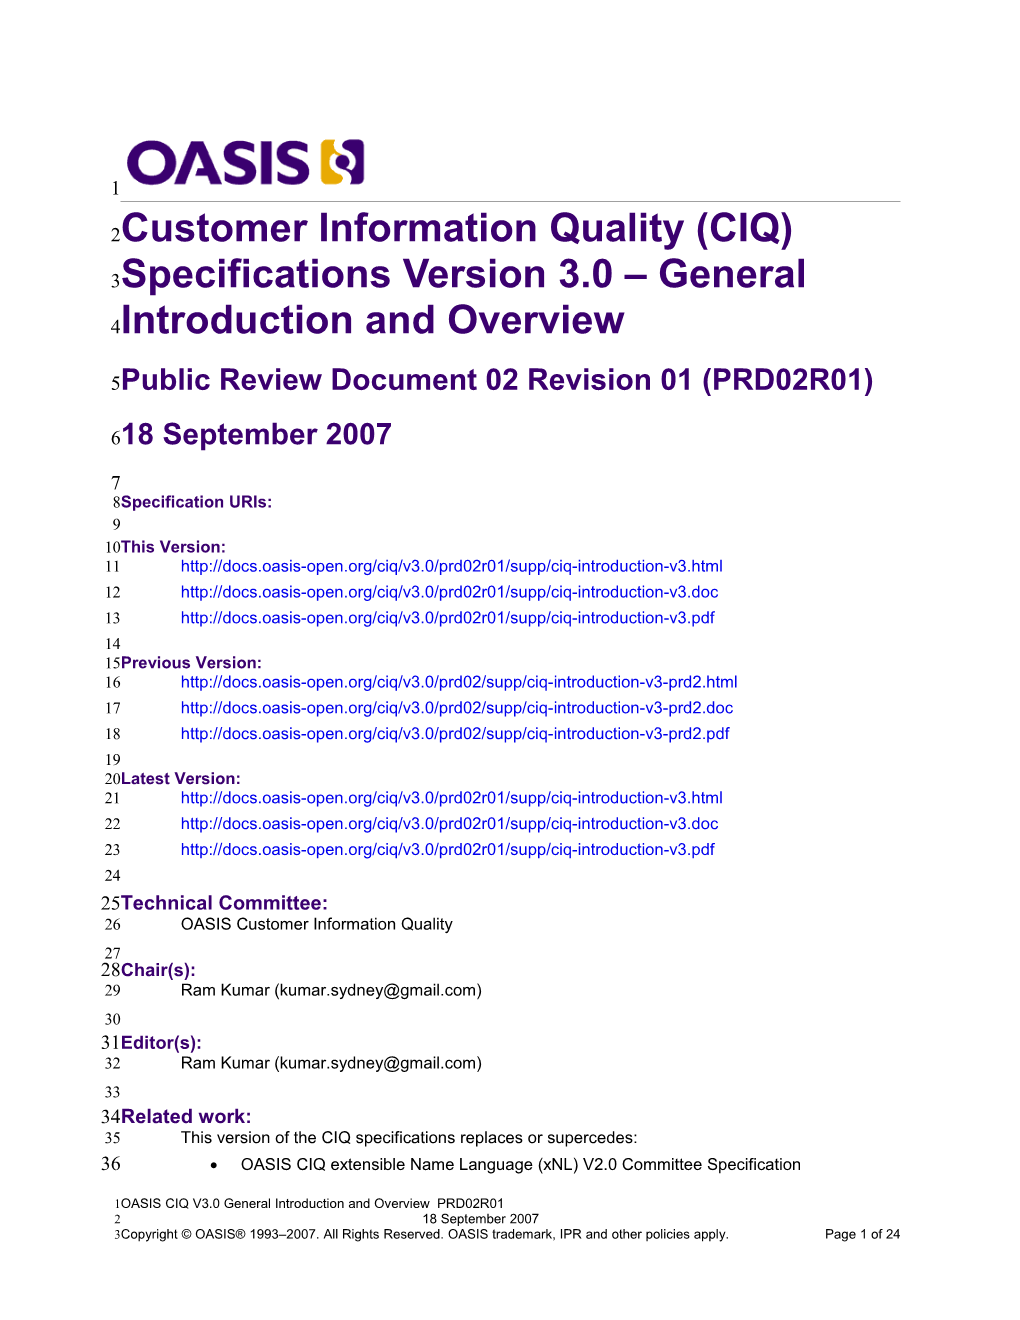 Customer Information Quality (CIQ) Specifications Version 3.0 General Introduction and Overview